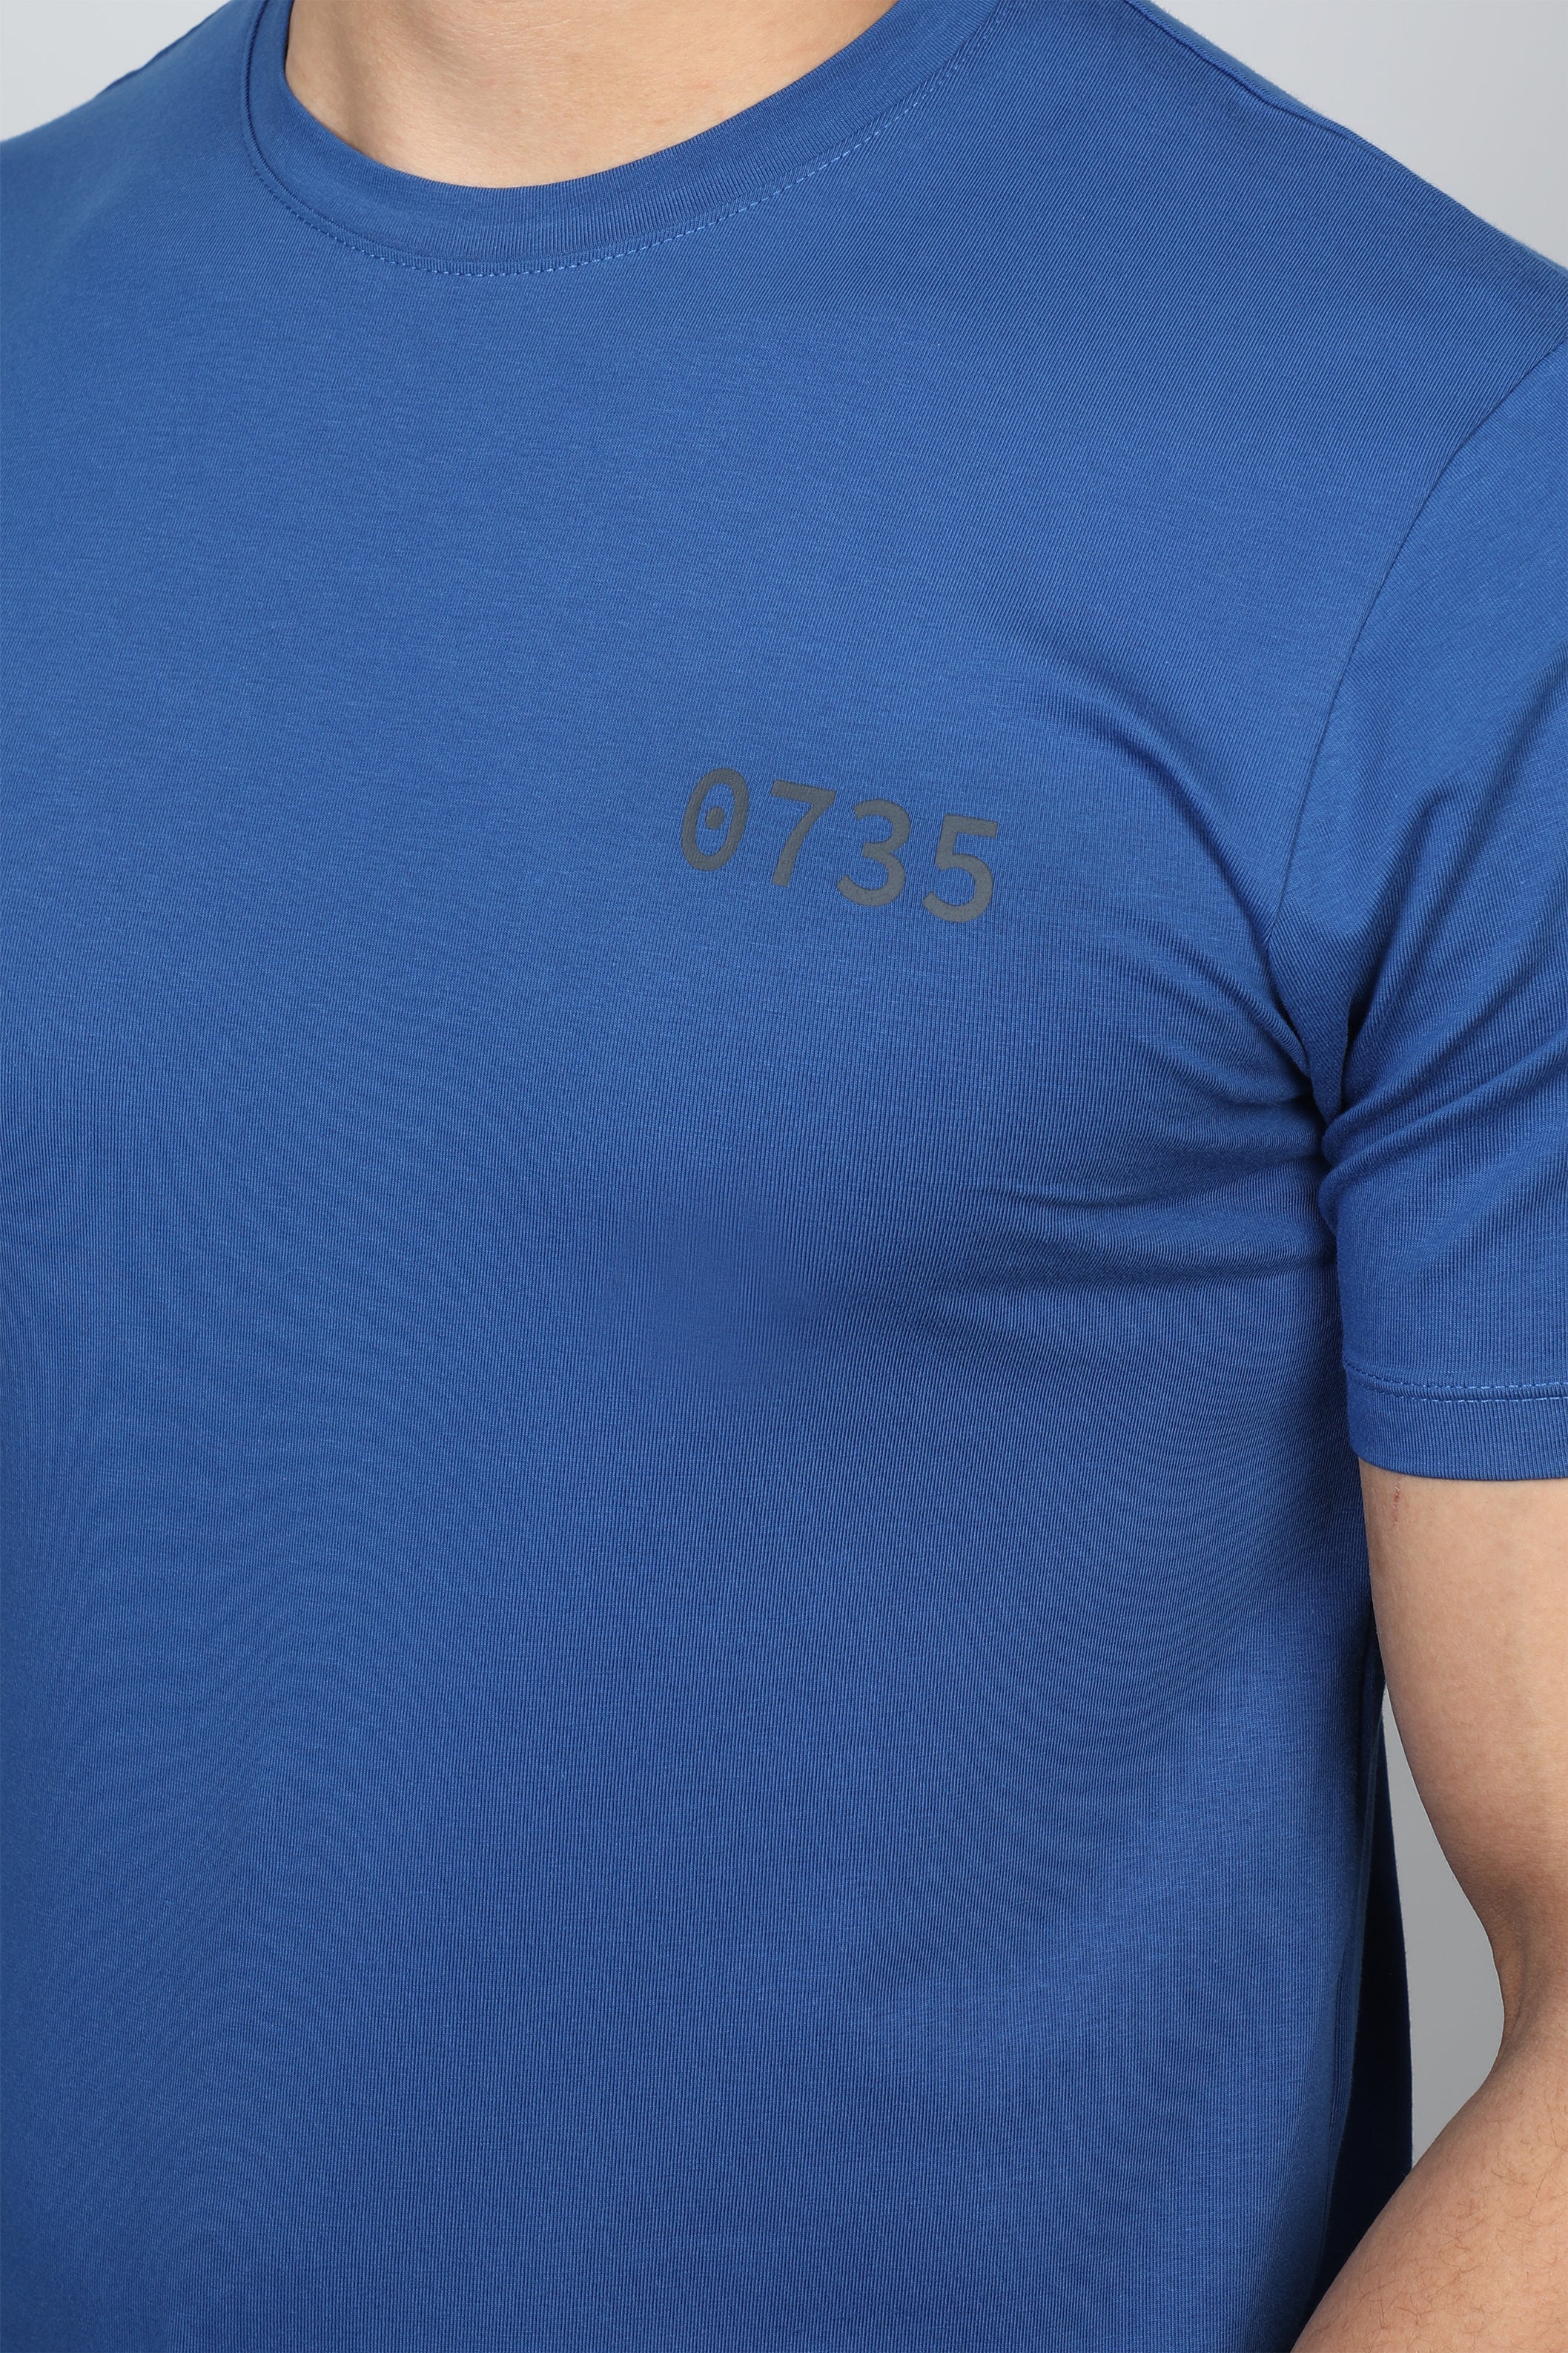 Blue T-shirt With Number Front Design And Back Logo